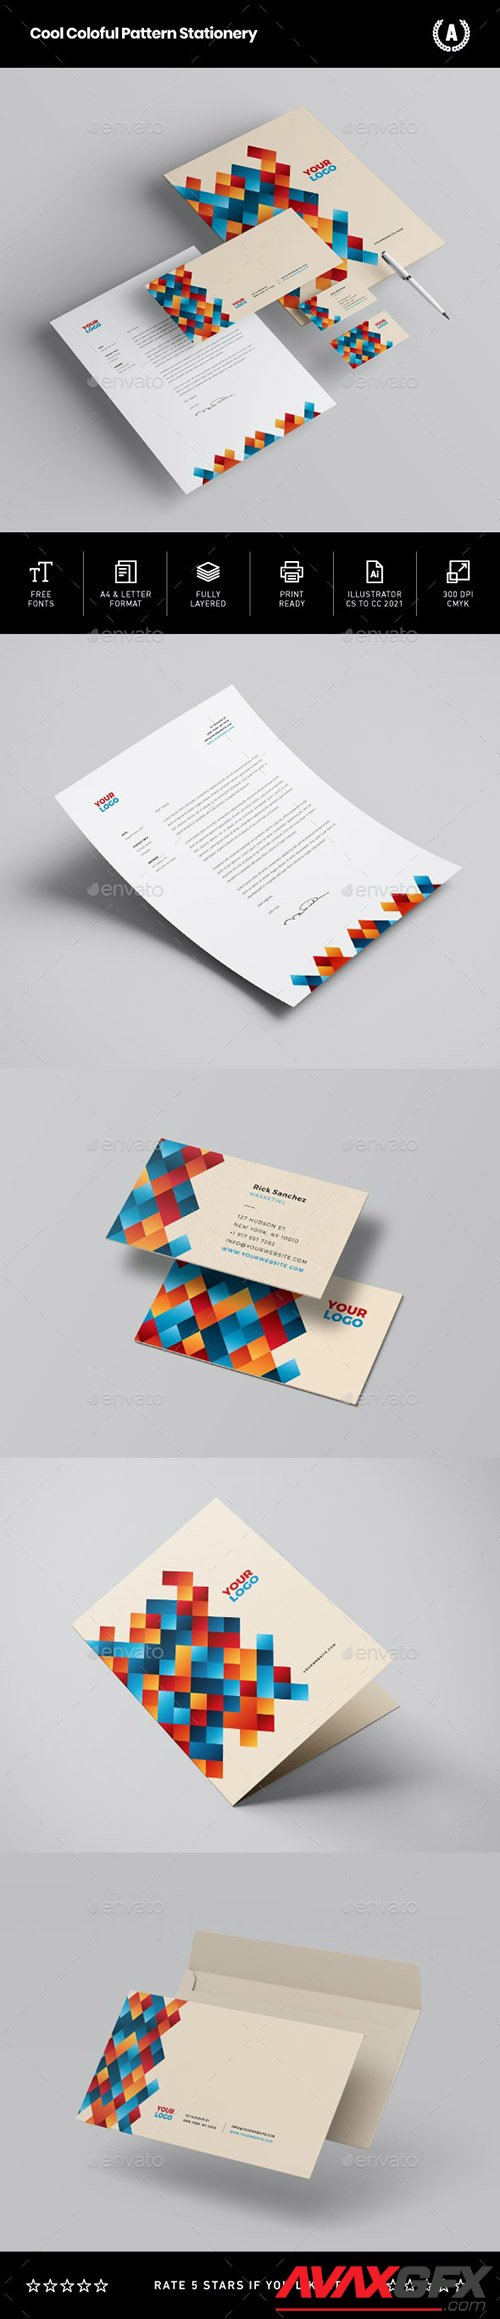 Cool Colorful Pattern Stationery 29328025